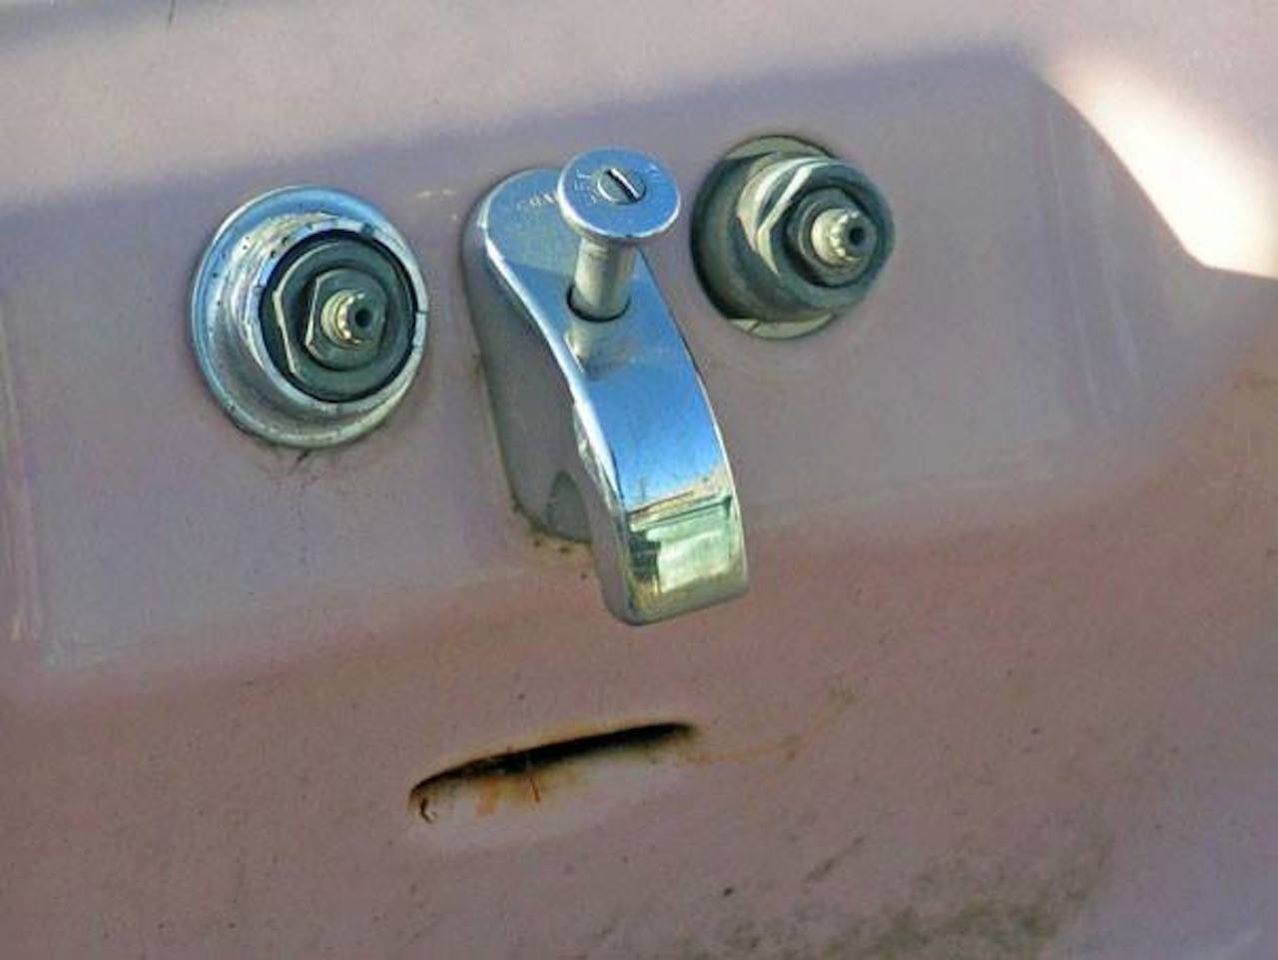 This troubled sink is an example of pareidolia.